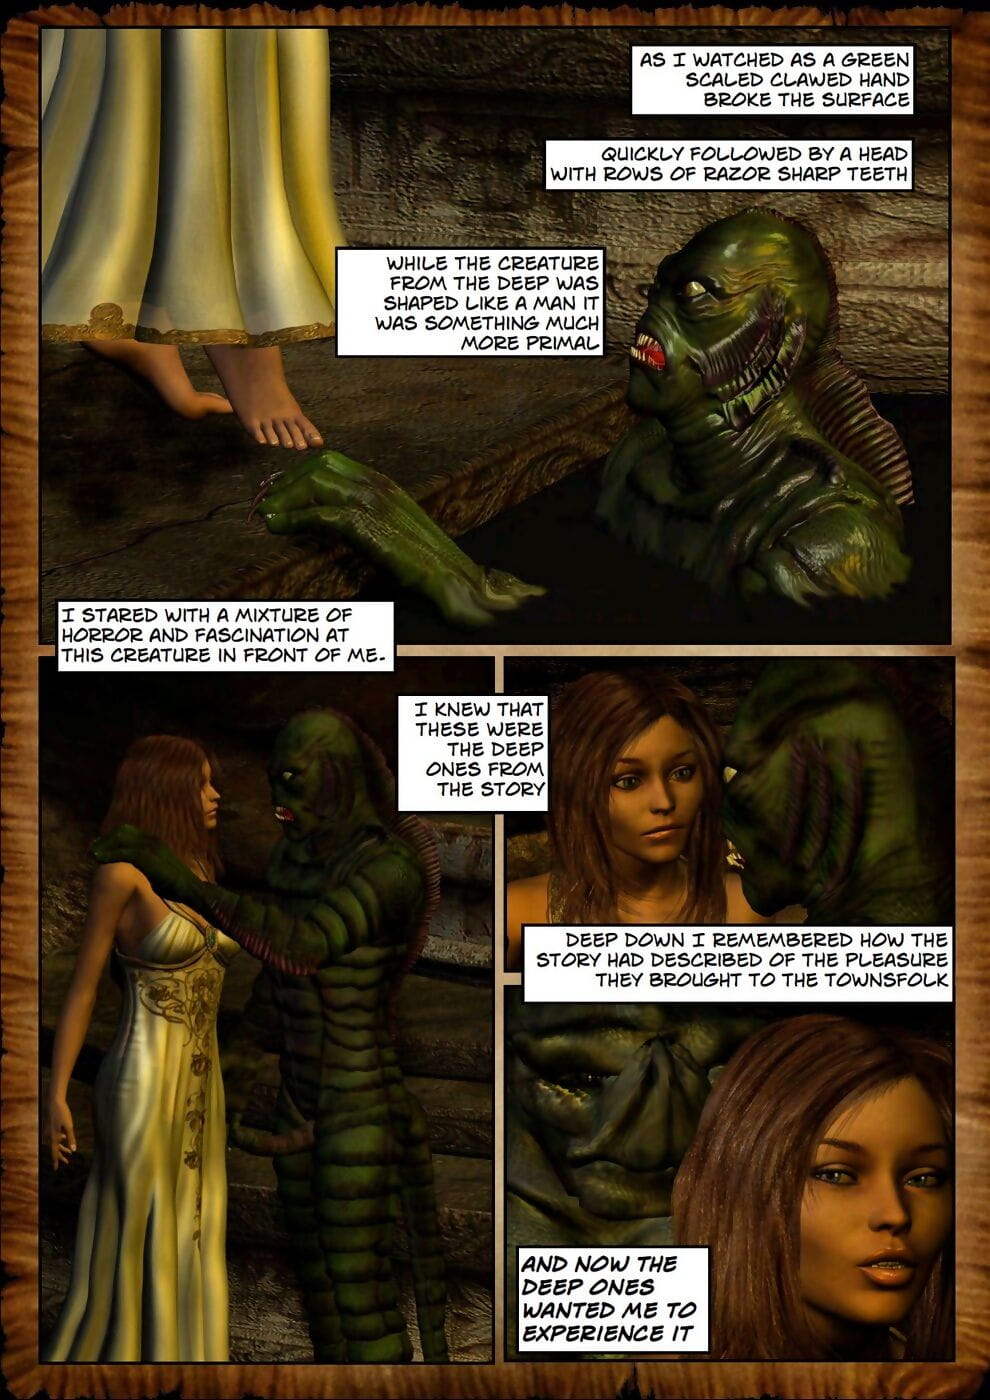 Taboo Studios- Shadows of Innsmouth 2 page 1